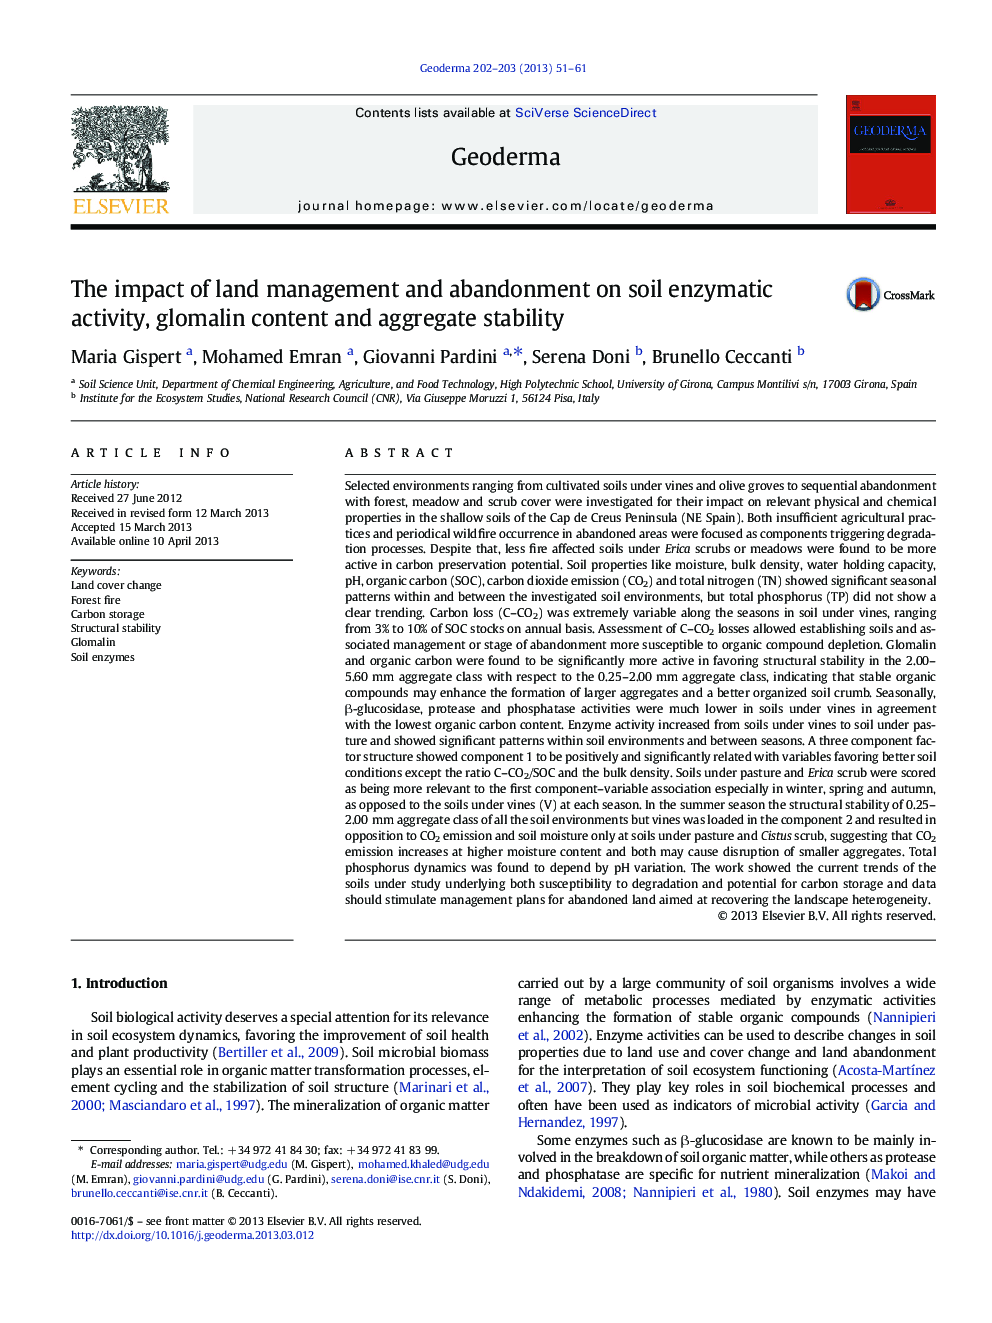 The impact of land management and abandonment on soil enzymatic activity, glomalin content and aggregate stability